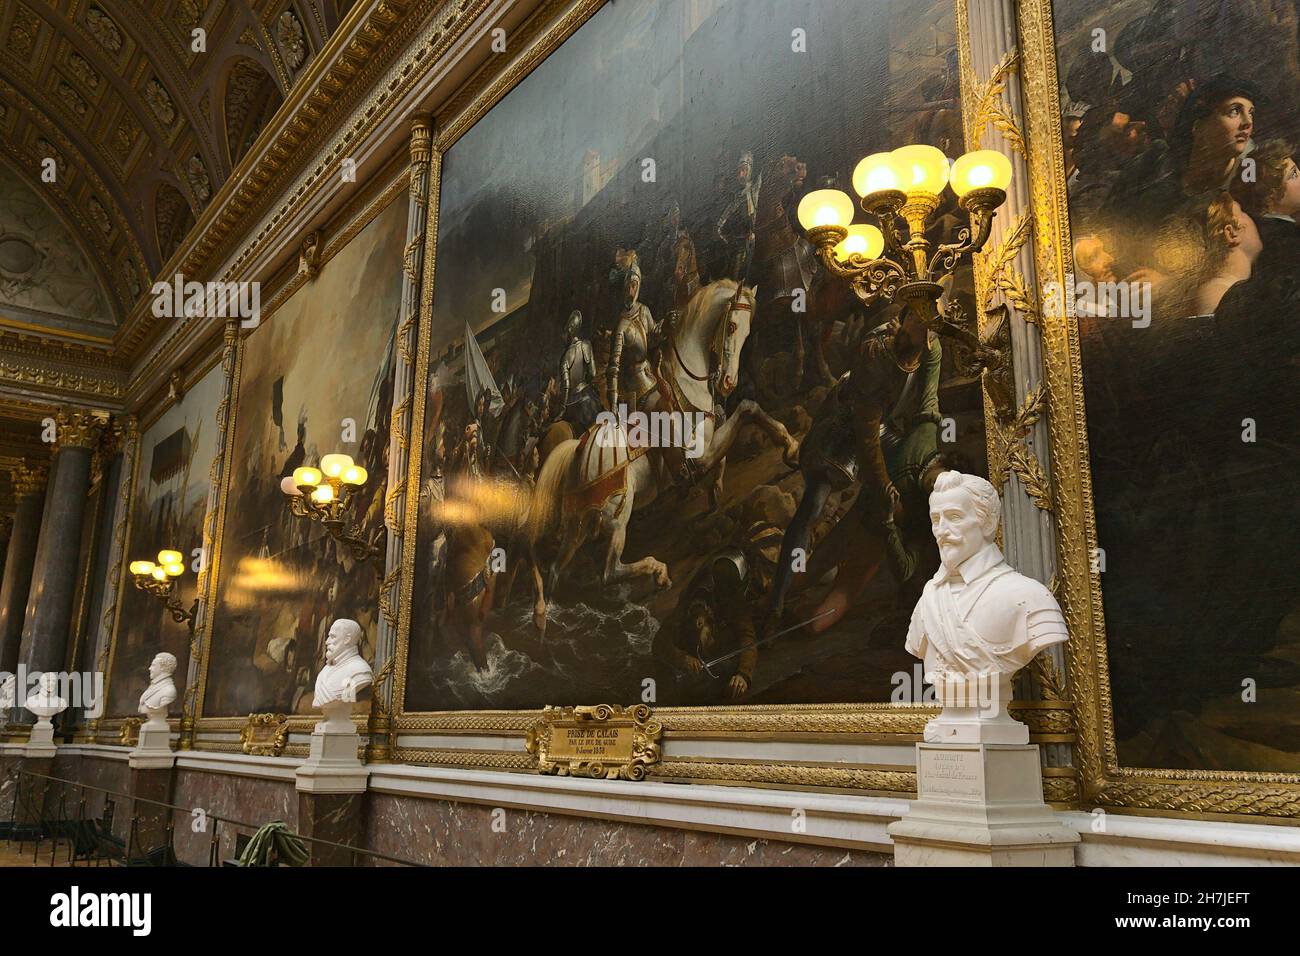 PARIS, FRANCE - Oct 01, 2019: The tourists walking around Gallery of Great Battles in Palace of Versailles at Paris, France Stock Photo